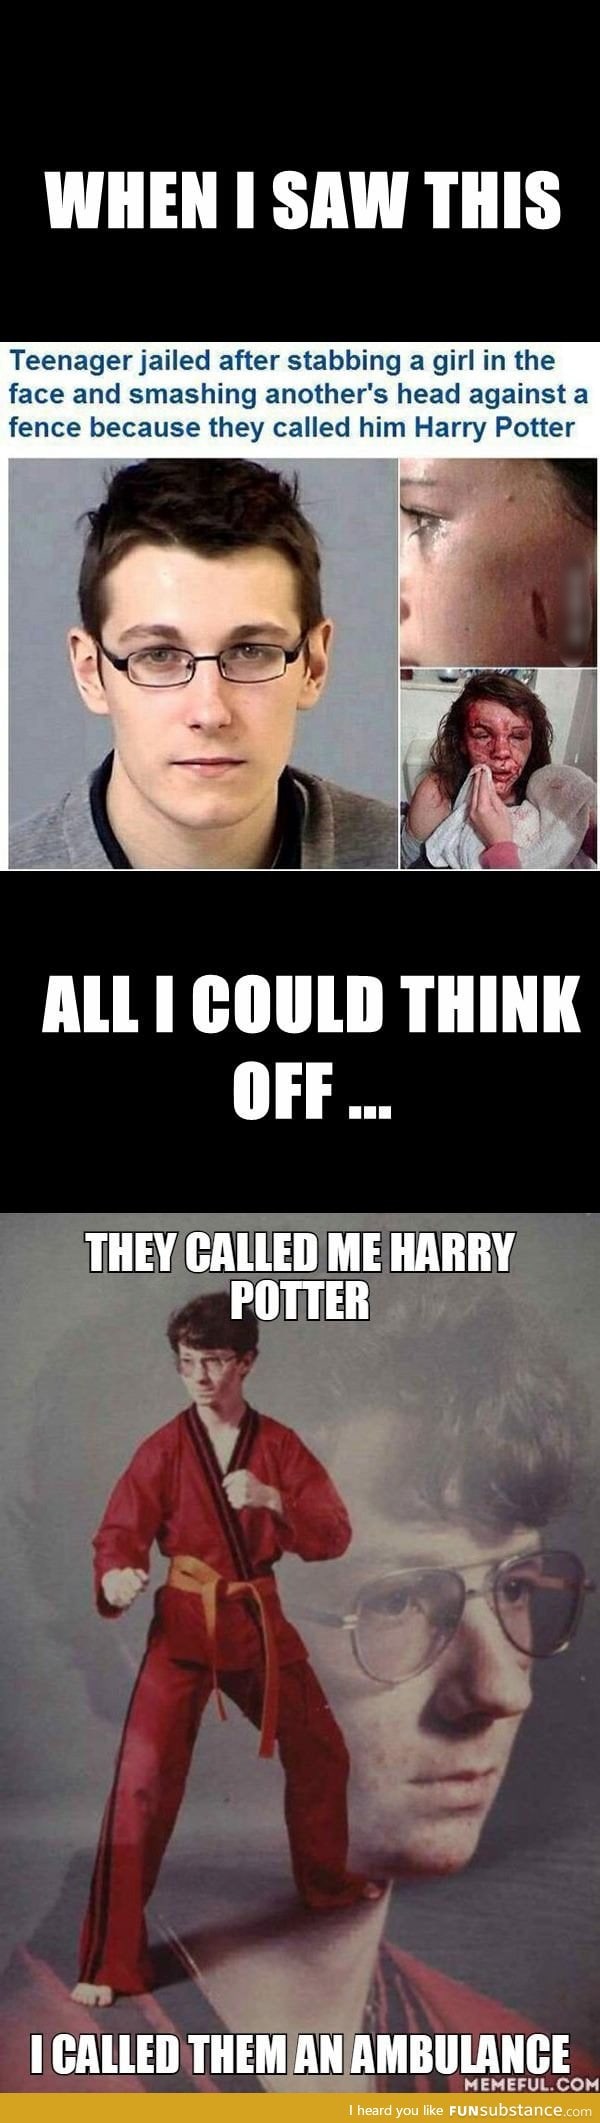 Don't call him Harry